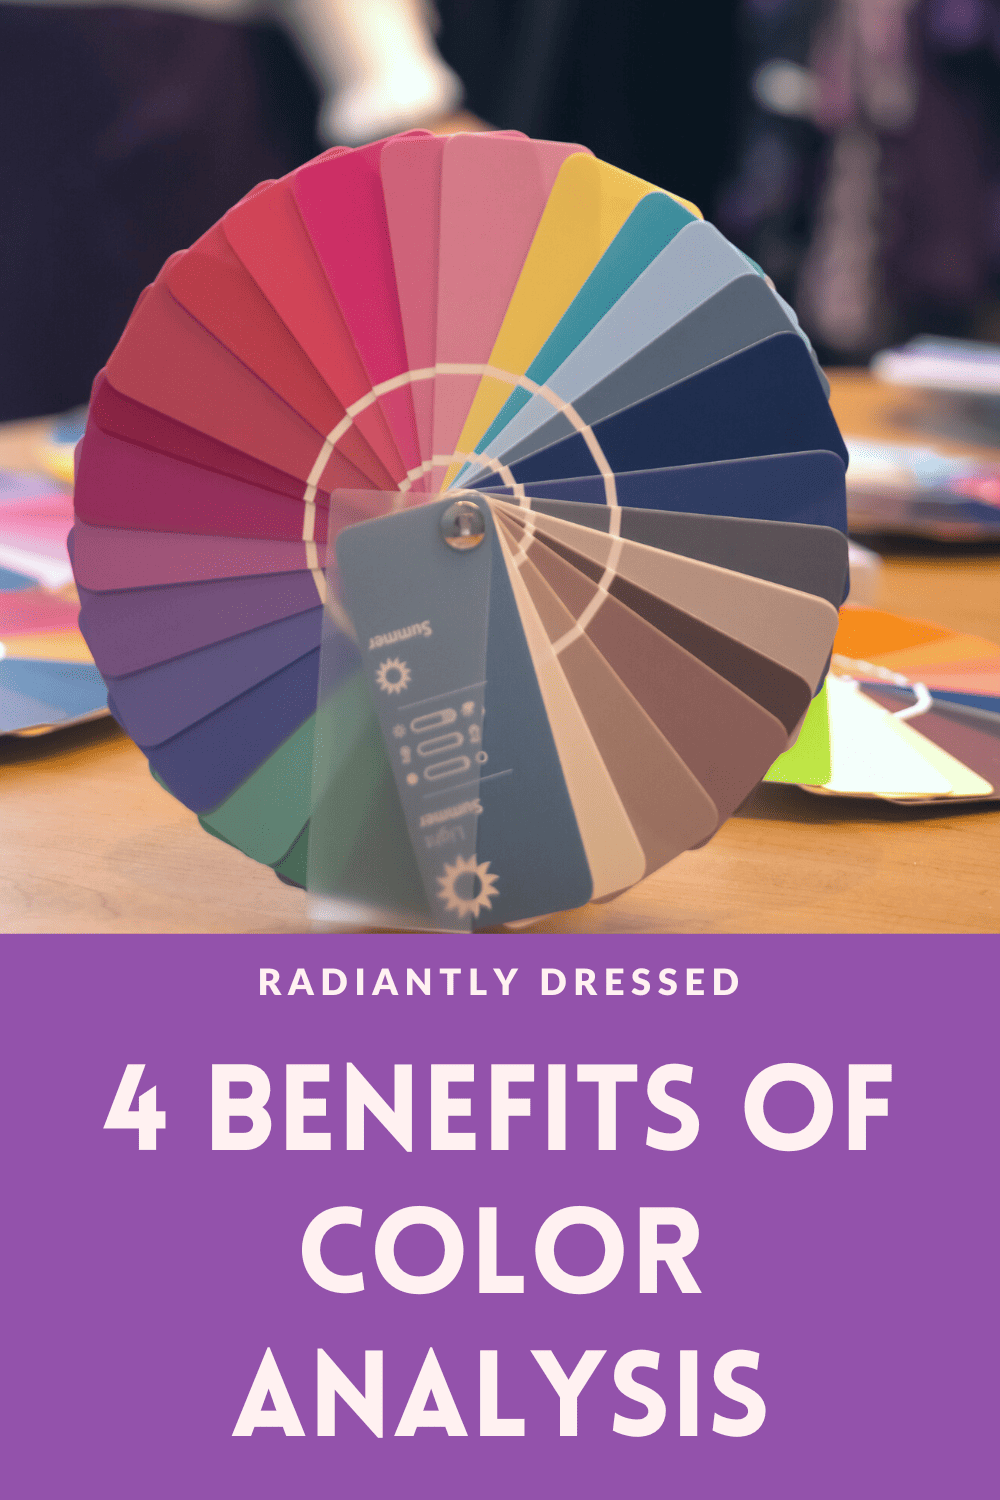 4 Benefits of Color Analysis